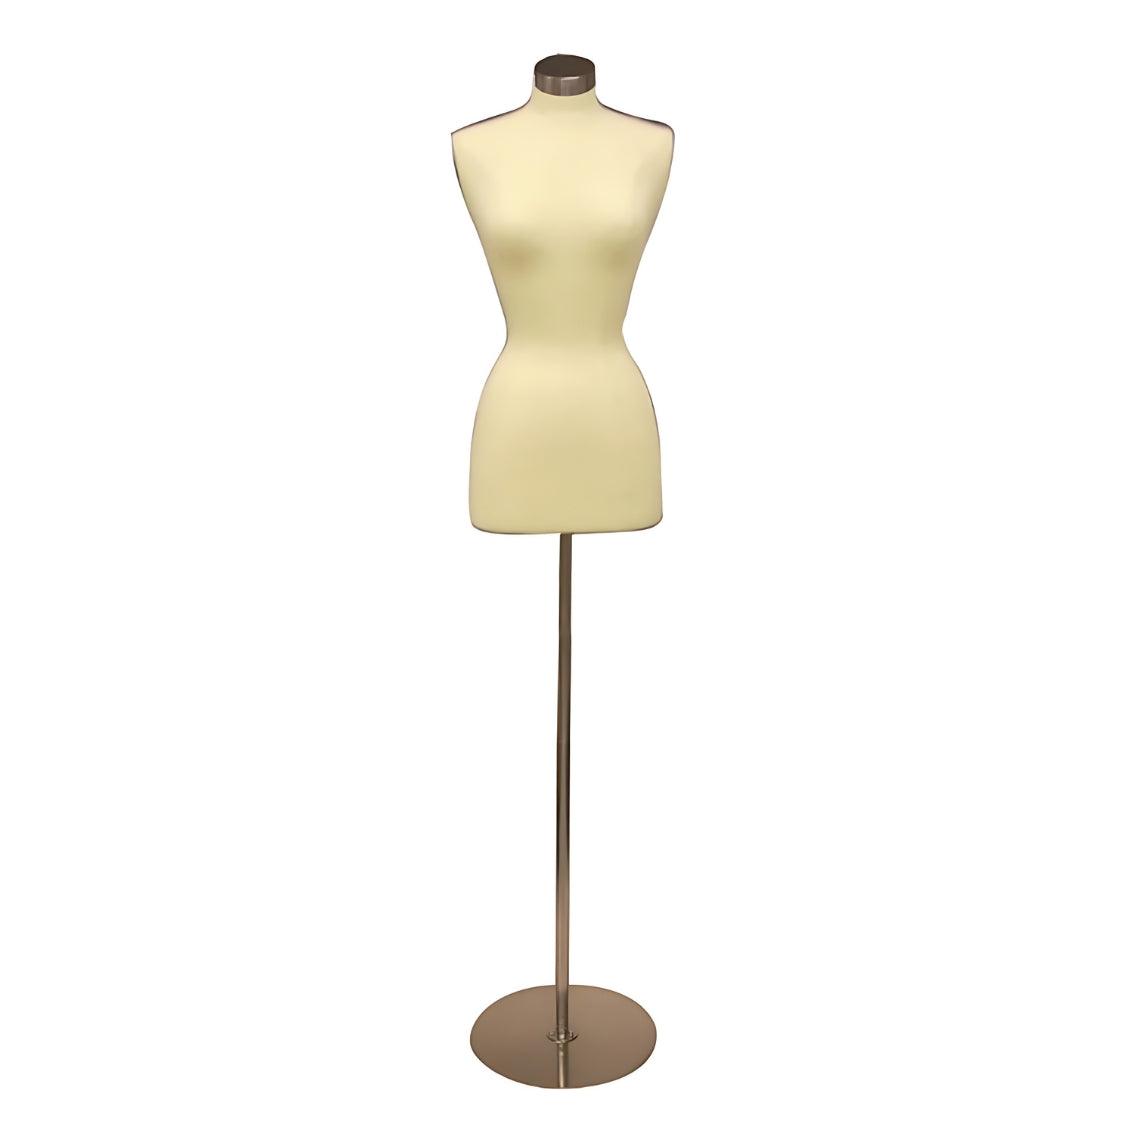 Fashionable Skin Color Full Body Female Mannequins Full Body Mannequin Best  Quality Hot Sale From Mannequin1688, $93.03